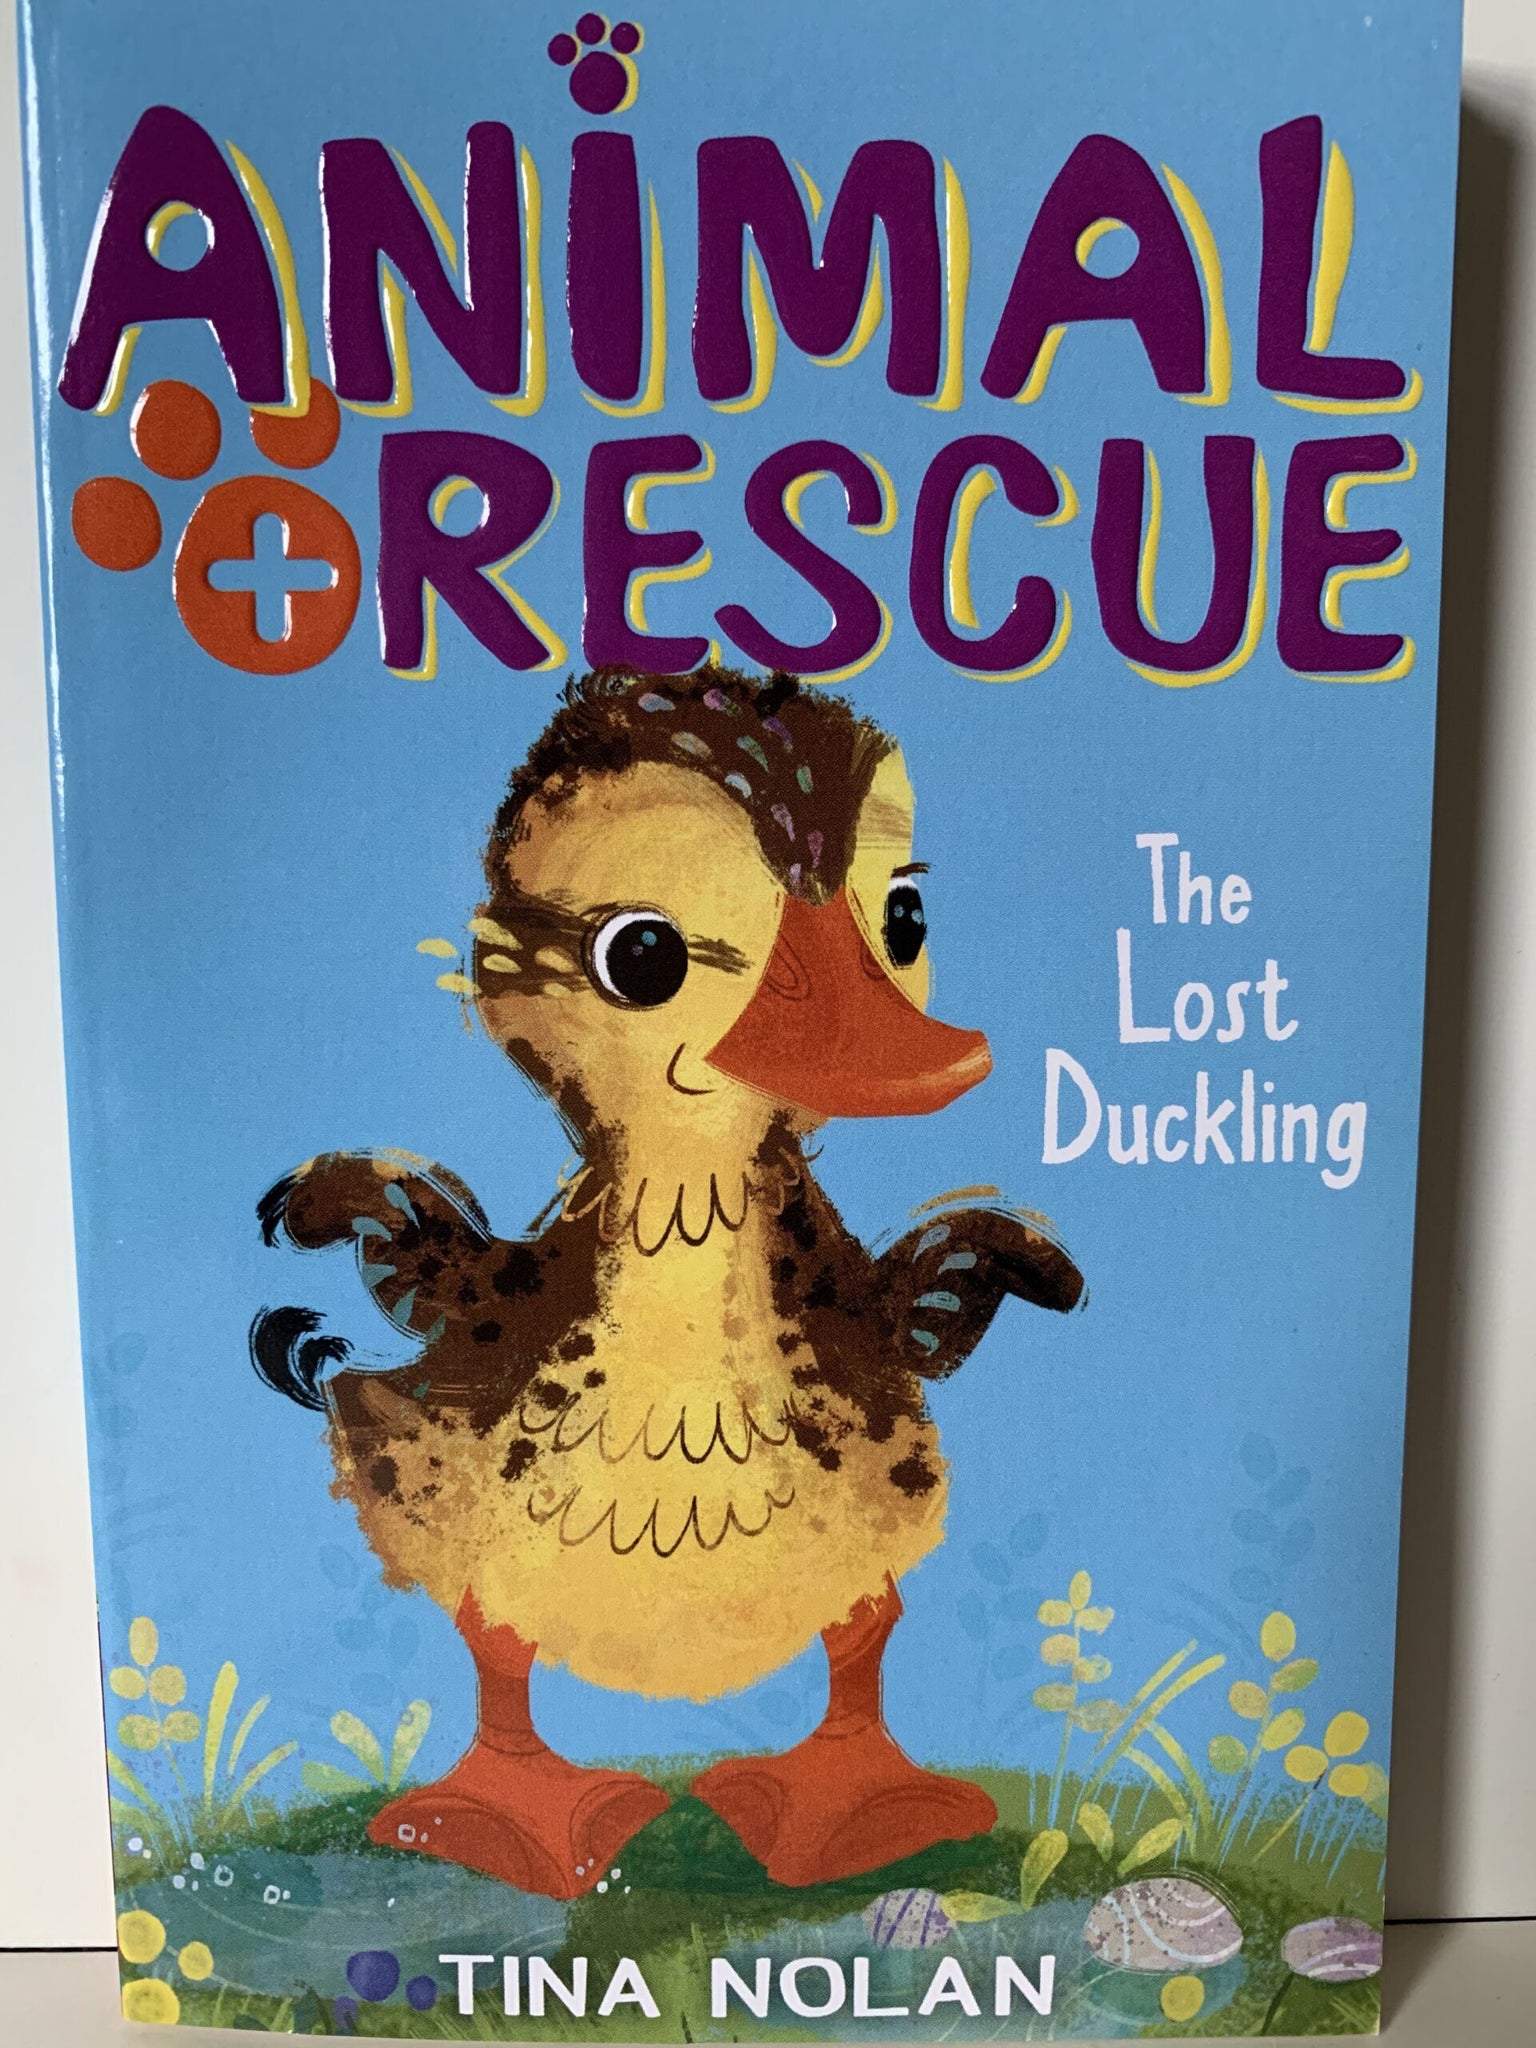 When Eva sees a family of ducks on the river, she falls in love with the tiniest duckling and names her Dilly. Then the ducks move from the riverbank and Dilly goes missing. Eva is determined to find her, but where do you start looking for a timid duckling?